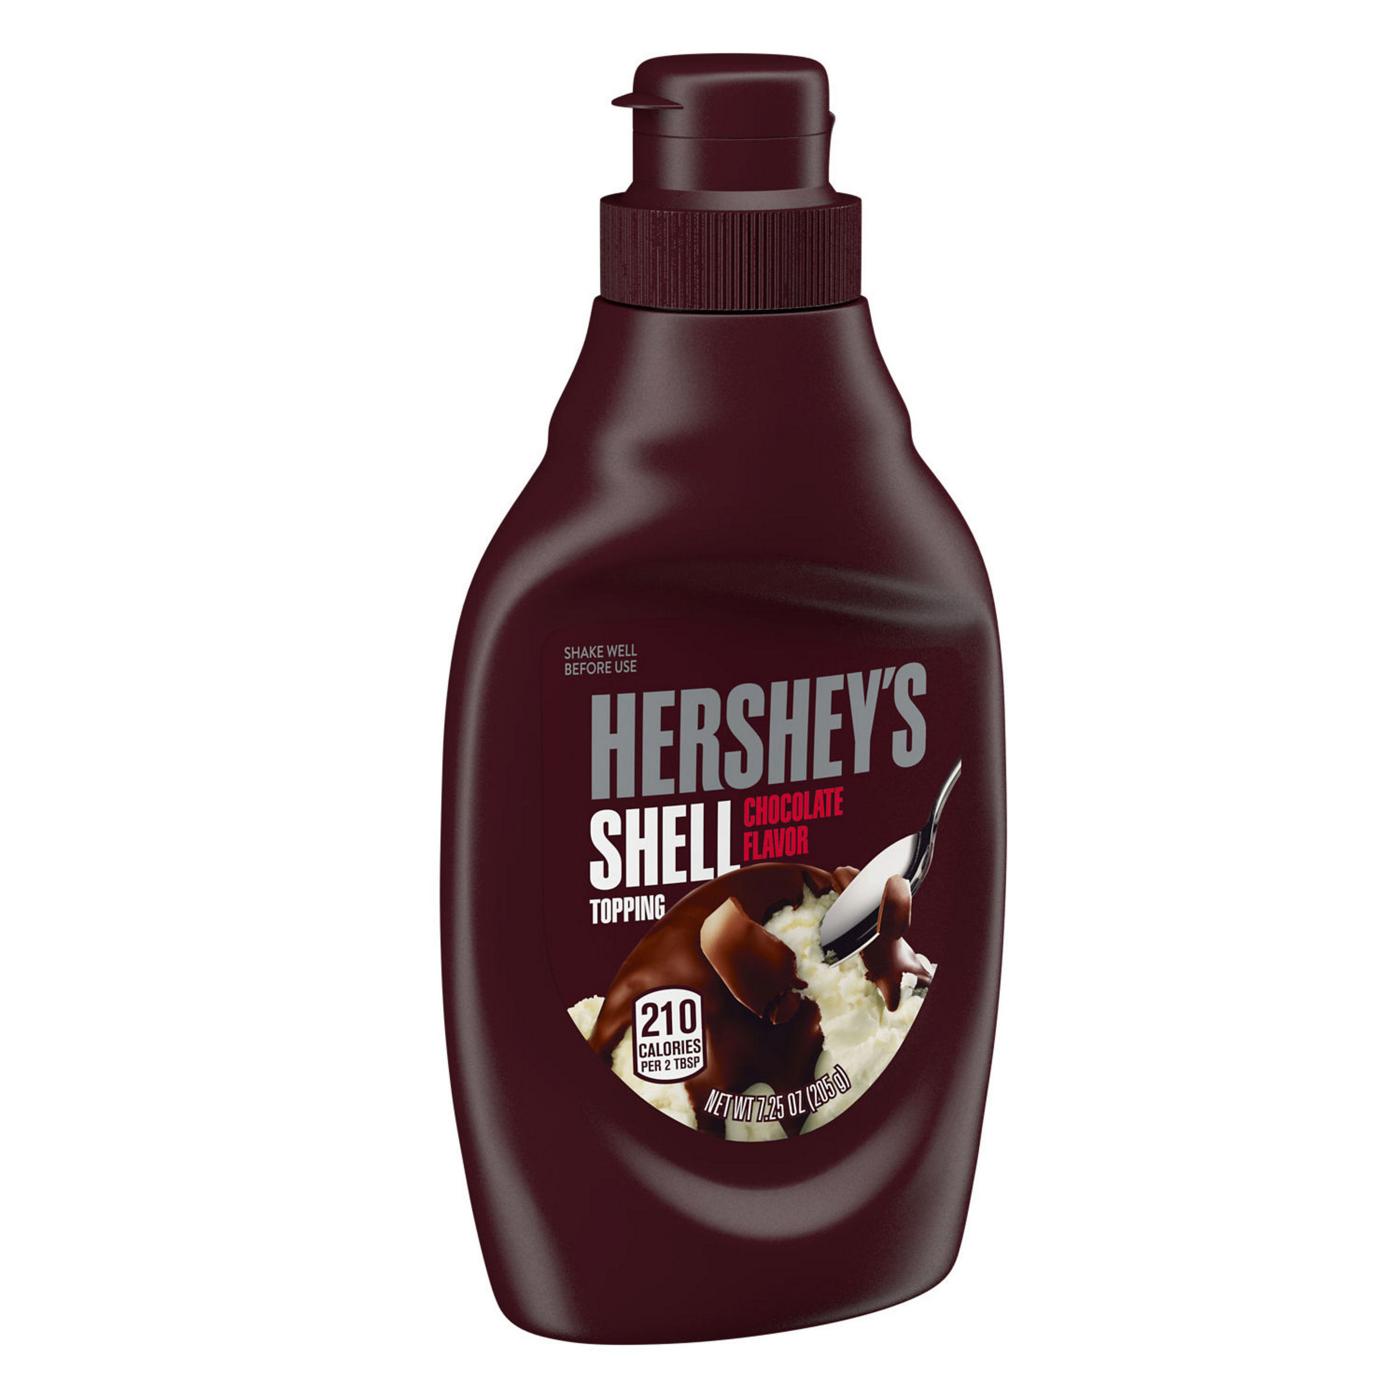 Hershey's Chocolate Flavored Shell Topping; image 5 of 5